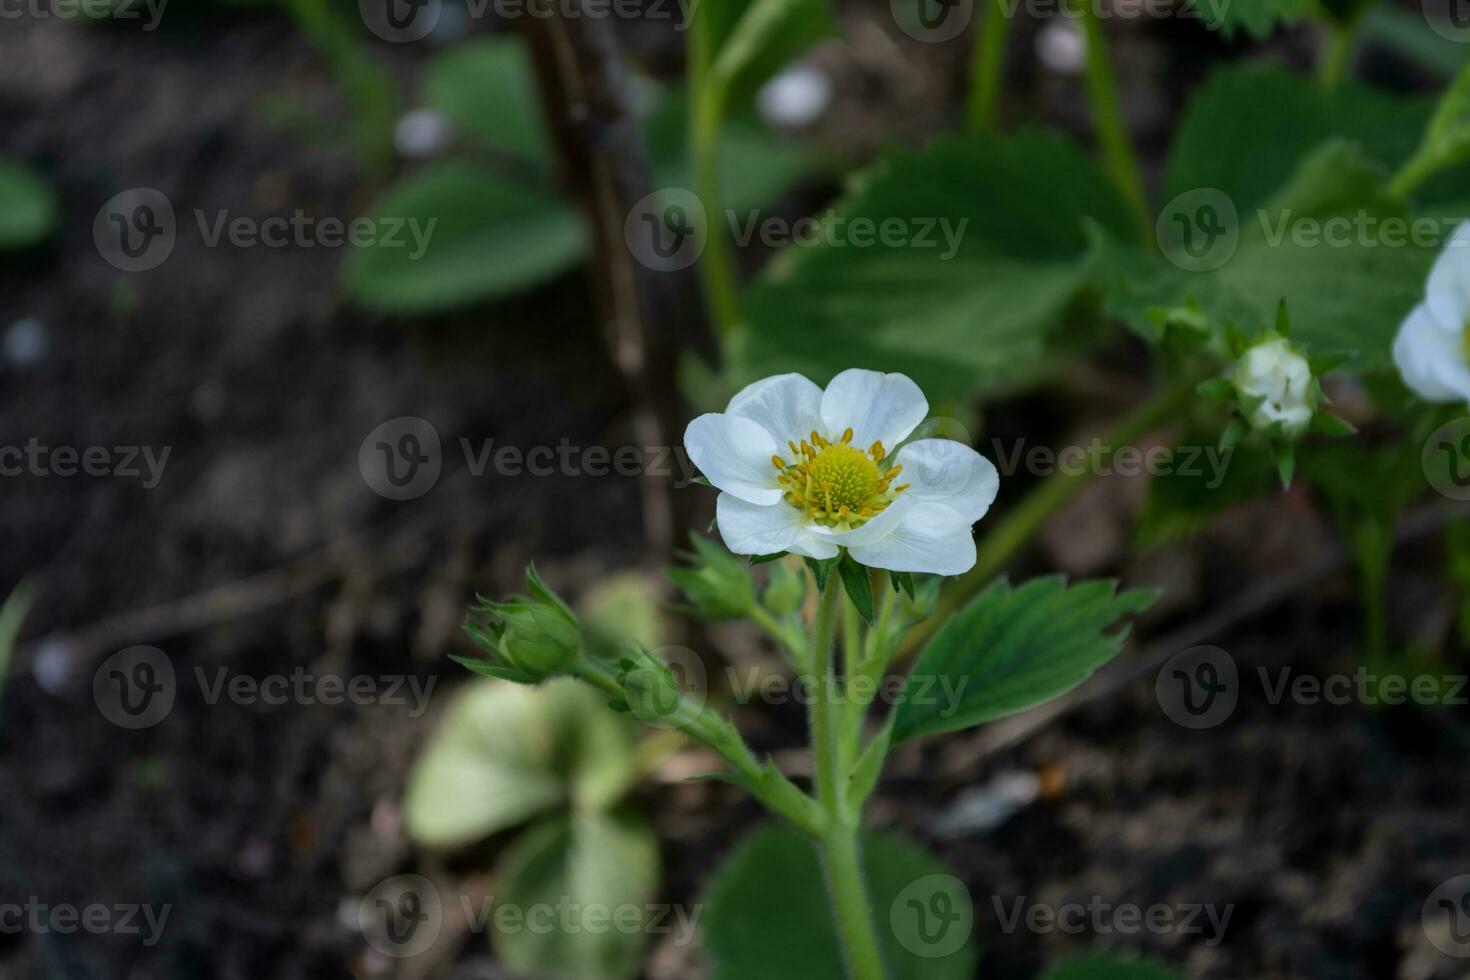 Strawberry with white flowers and green leaves, soil visible in the background. photo